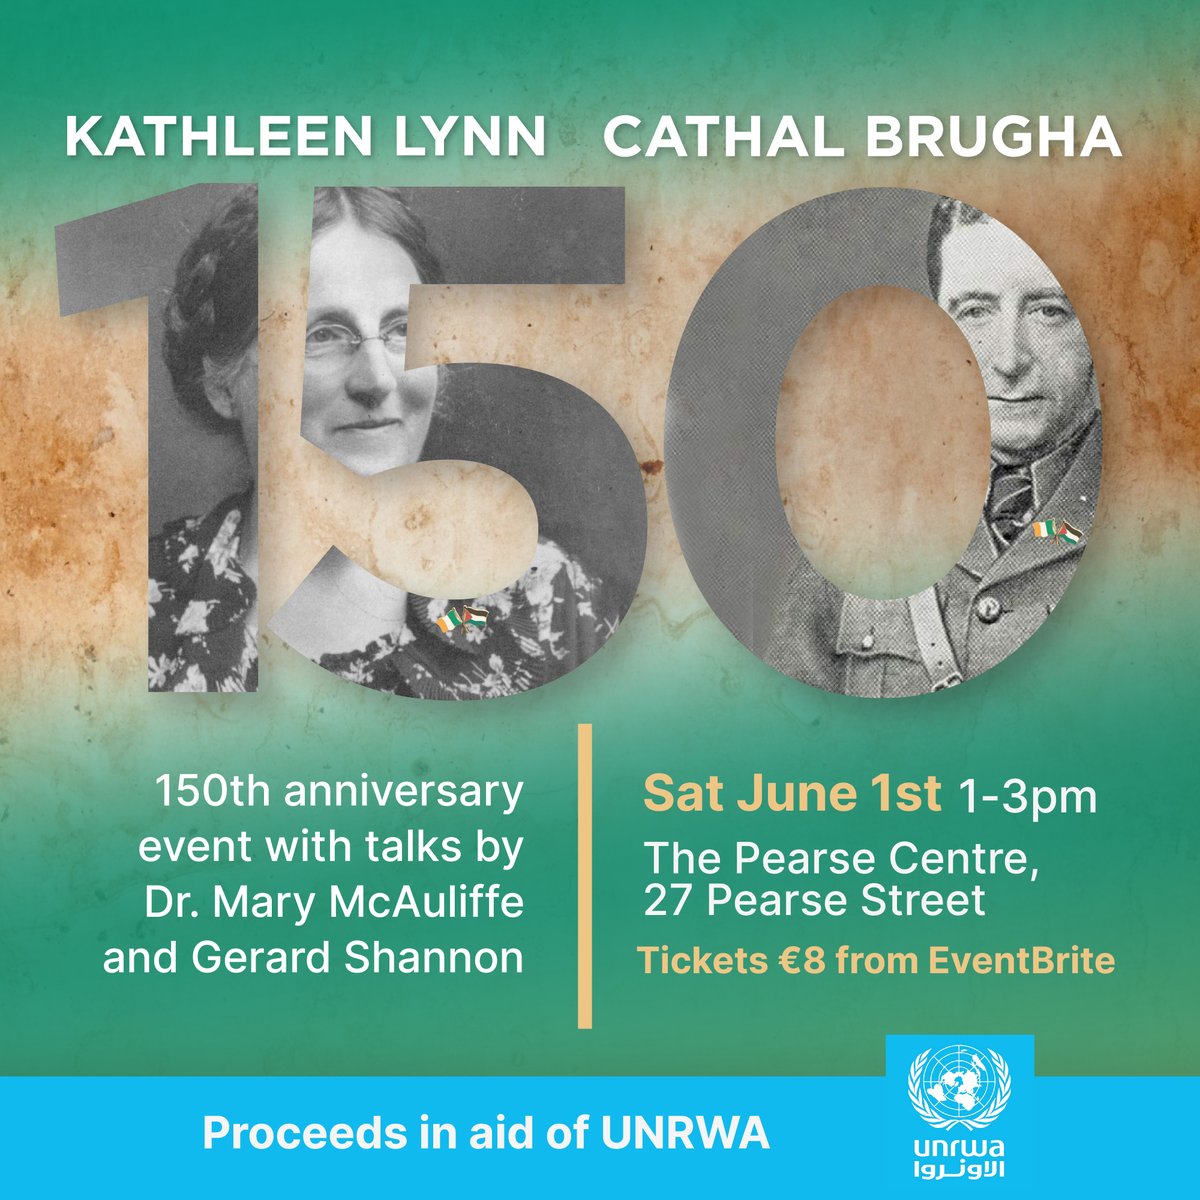 Announcing an event - in aid of @UNRWA - on Saturday, 1st June, marking the 150th anniversary of the births of Kathleen Lynn and Cathal Brugha. @MaryMcAuliffe4 will talk about Lynn, myself about Brugha, and @lizgillis191623 will moderate. Tickets here: eventbrite.ie/e/150-kathleen…